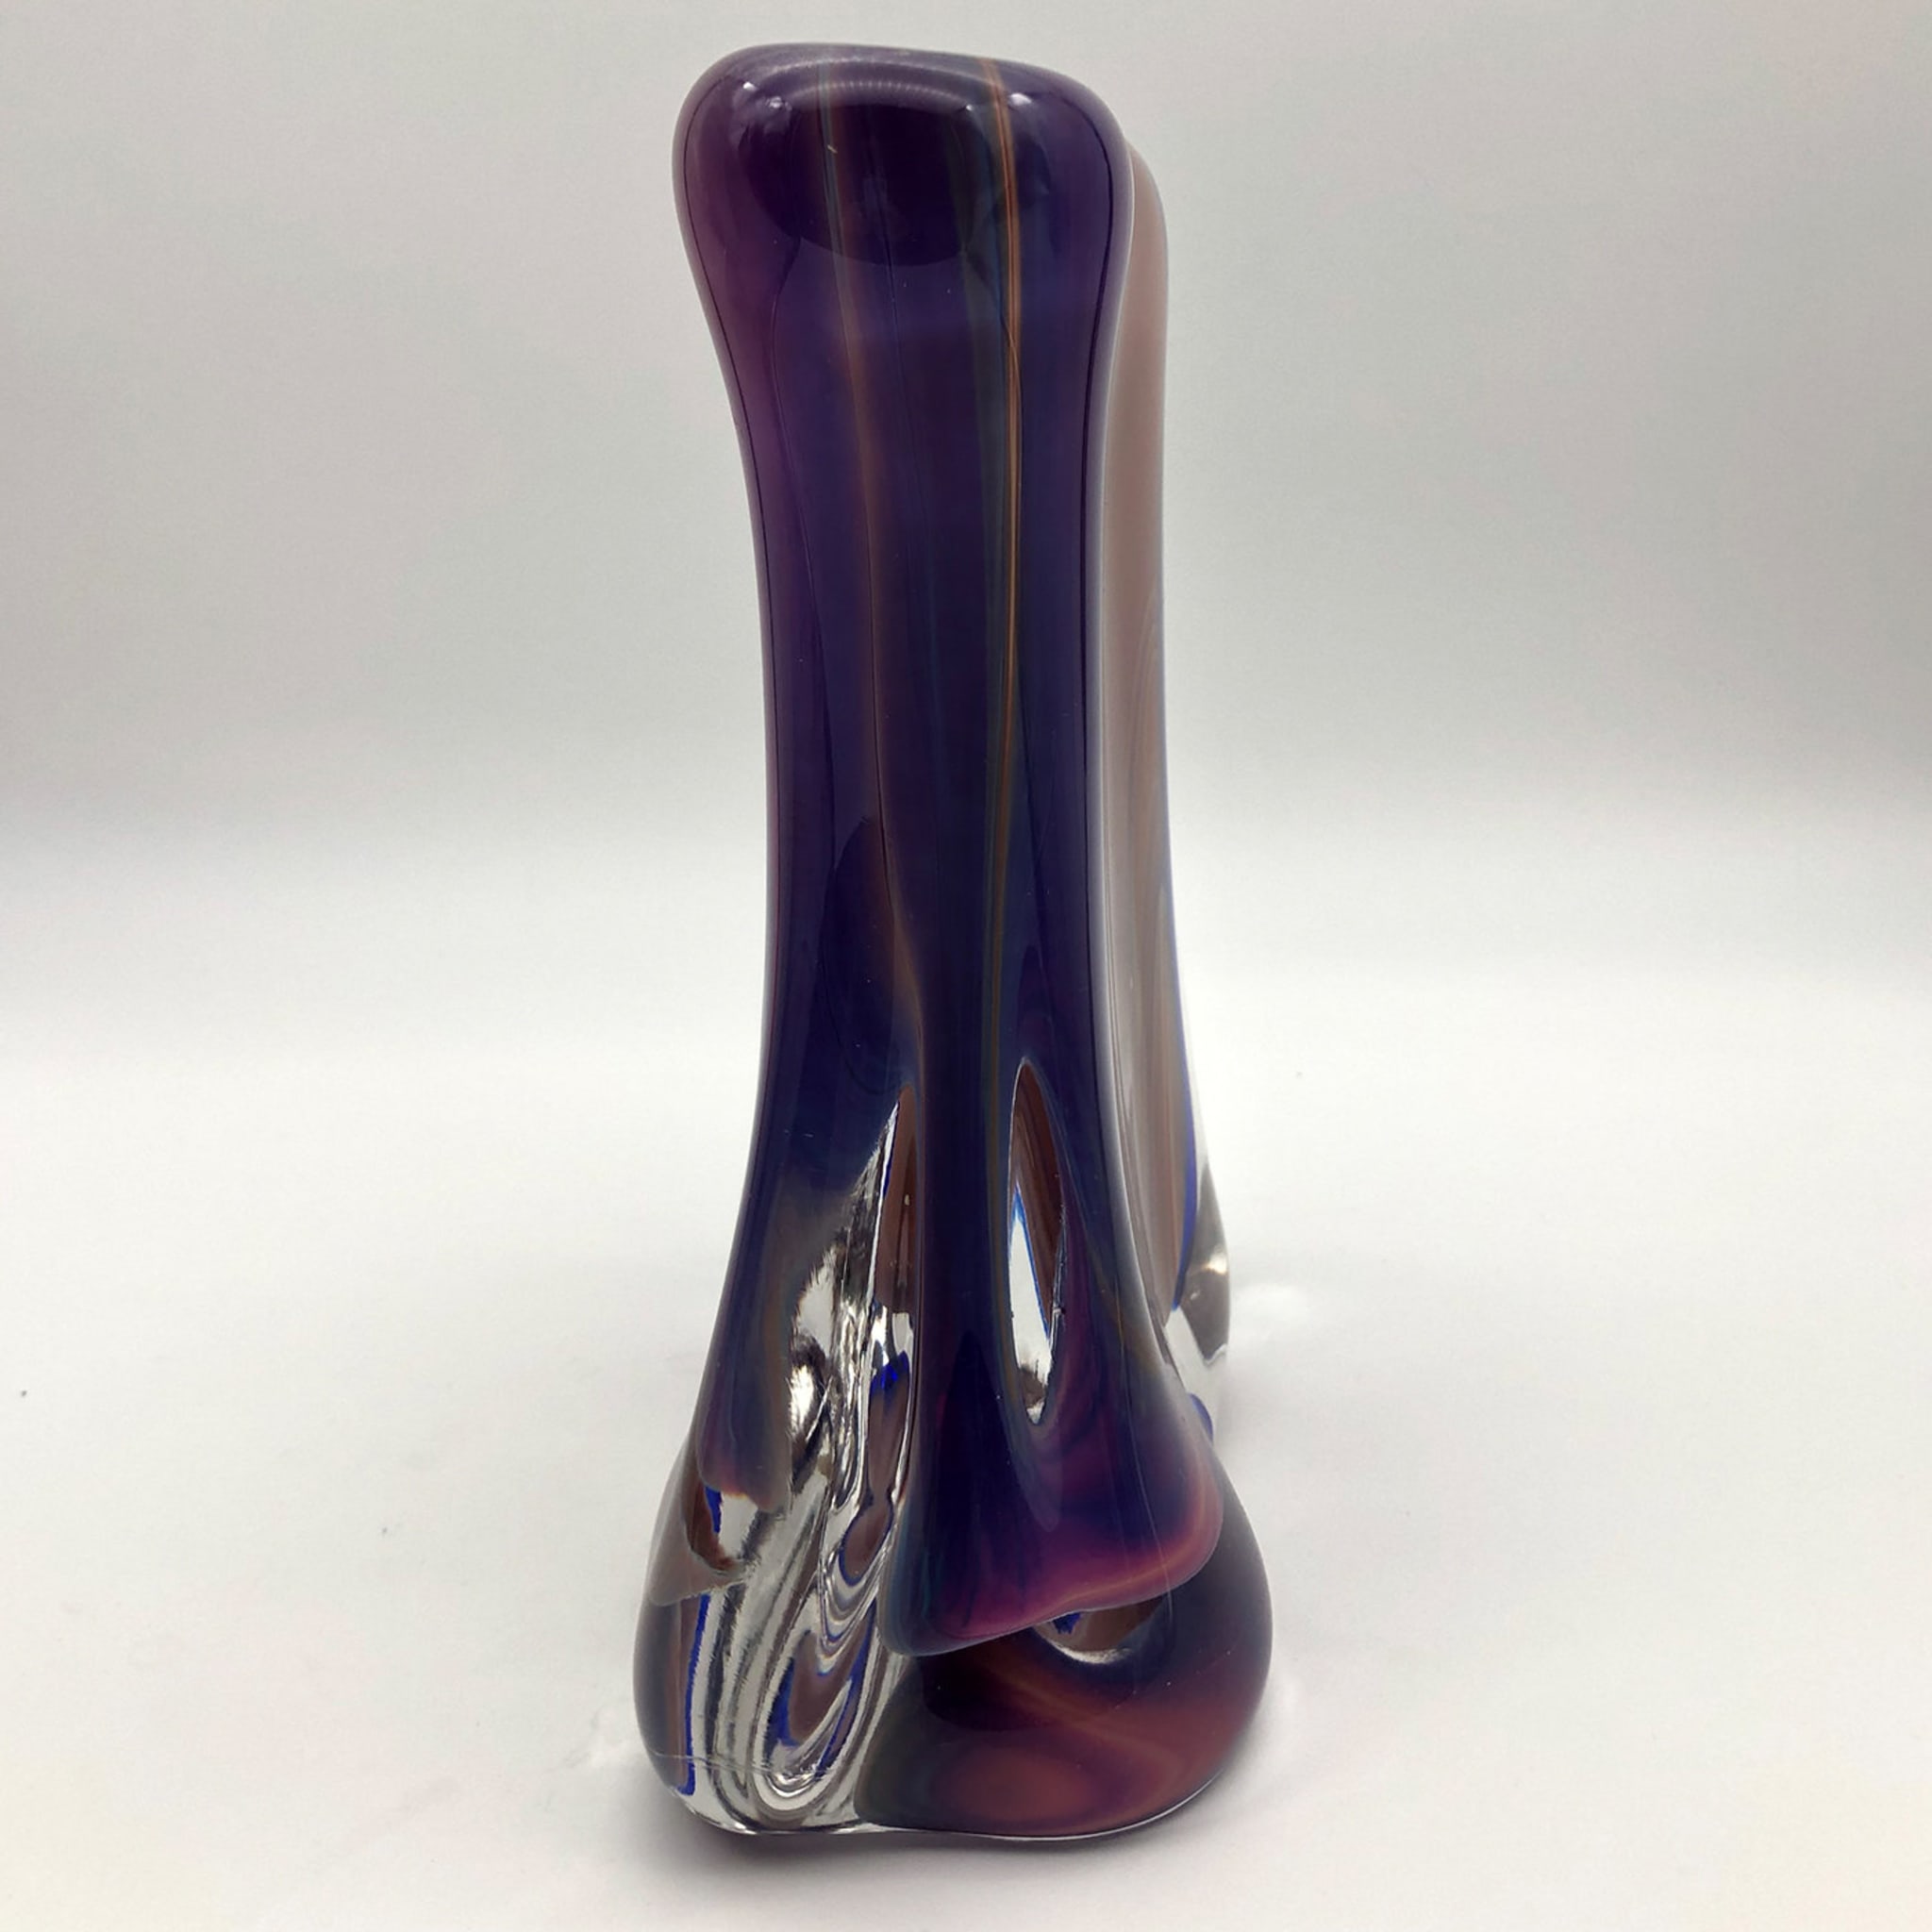 Chalcedony Vase by Toso Cristiano - Alternative view 2